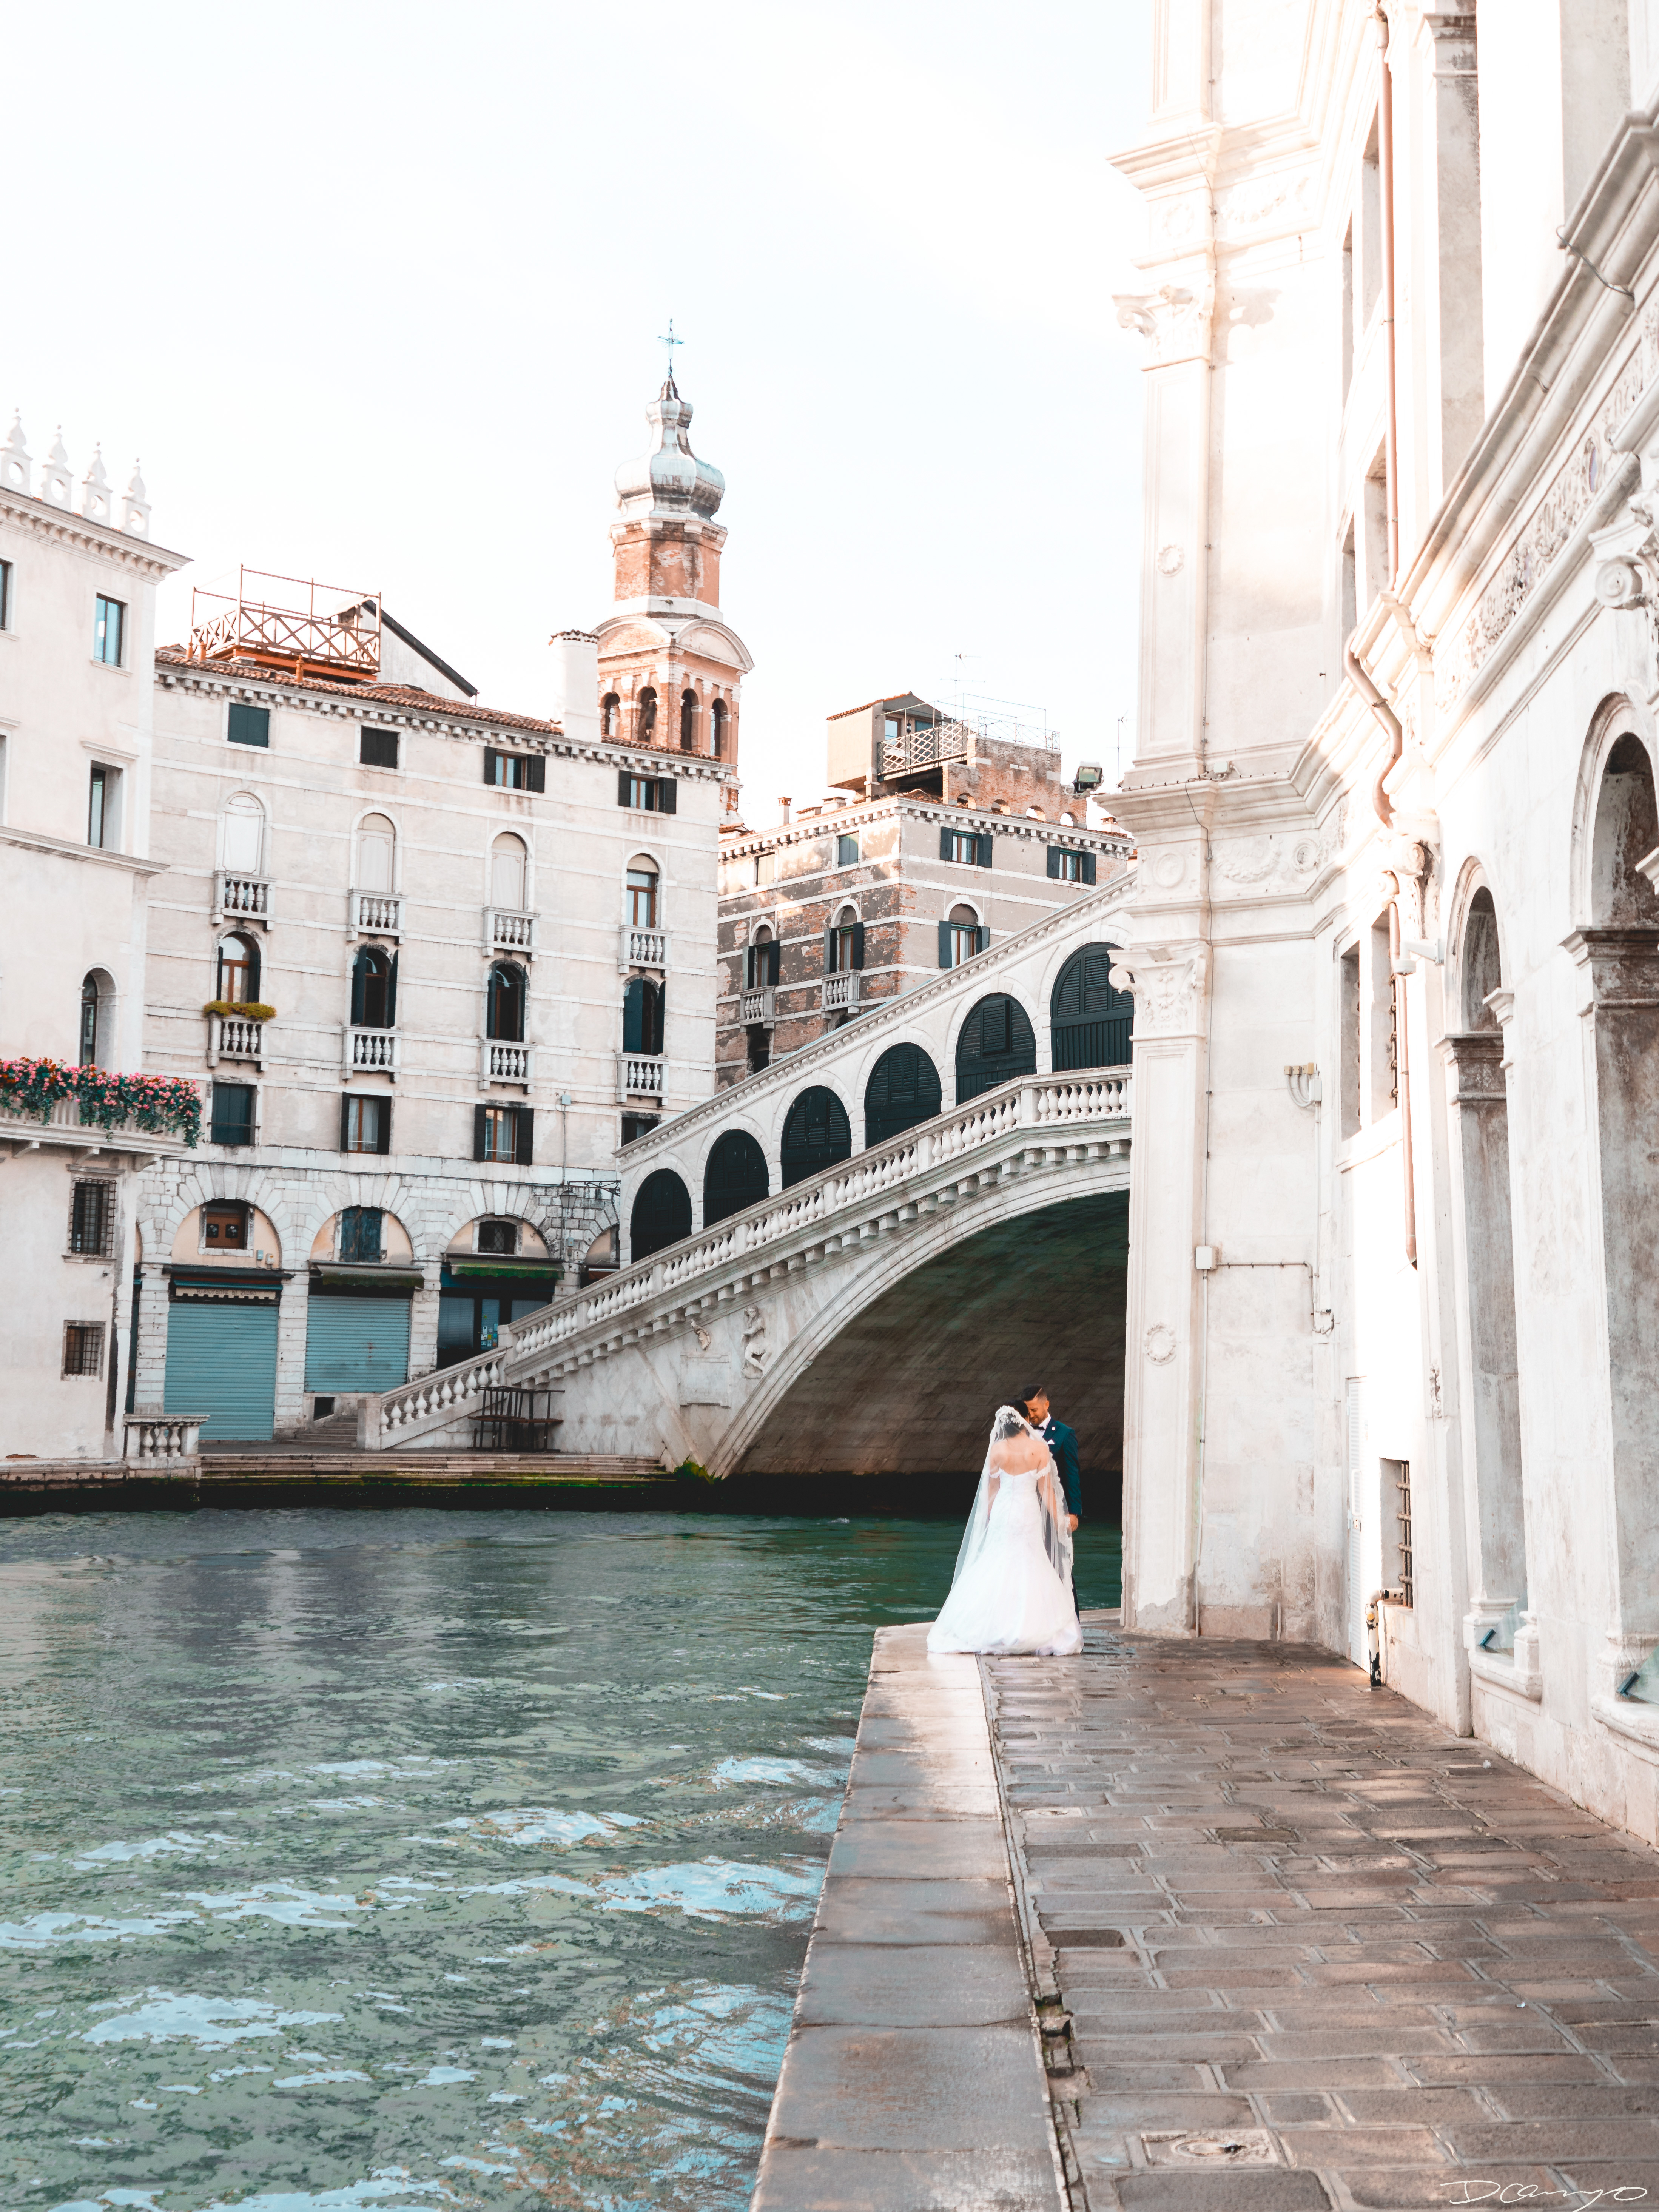 A newly wed couple standing on a walkway under the Rialto Bridge in Venice, Italy.